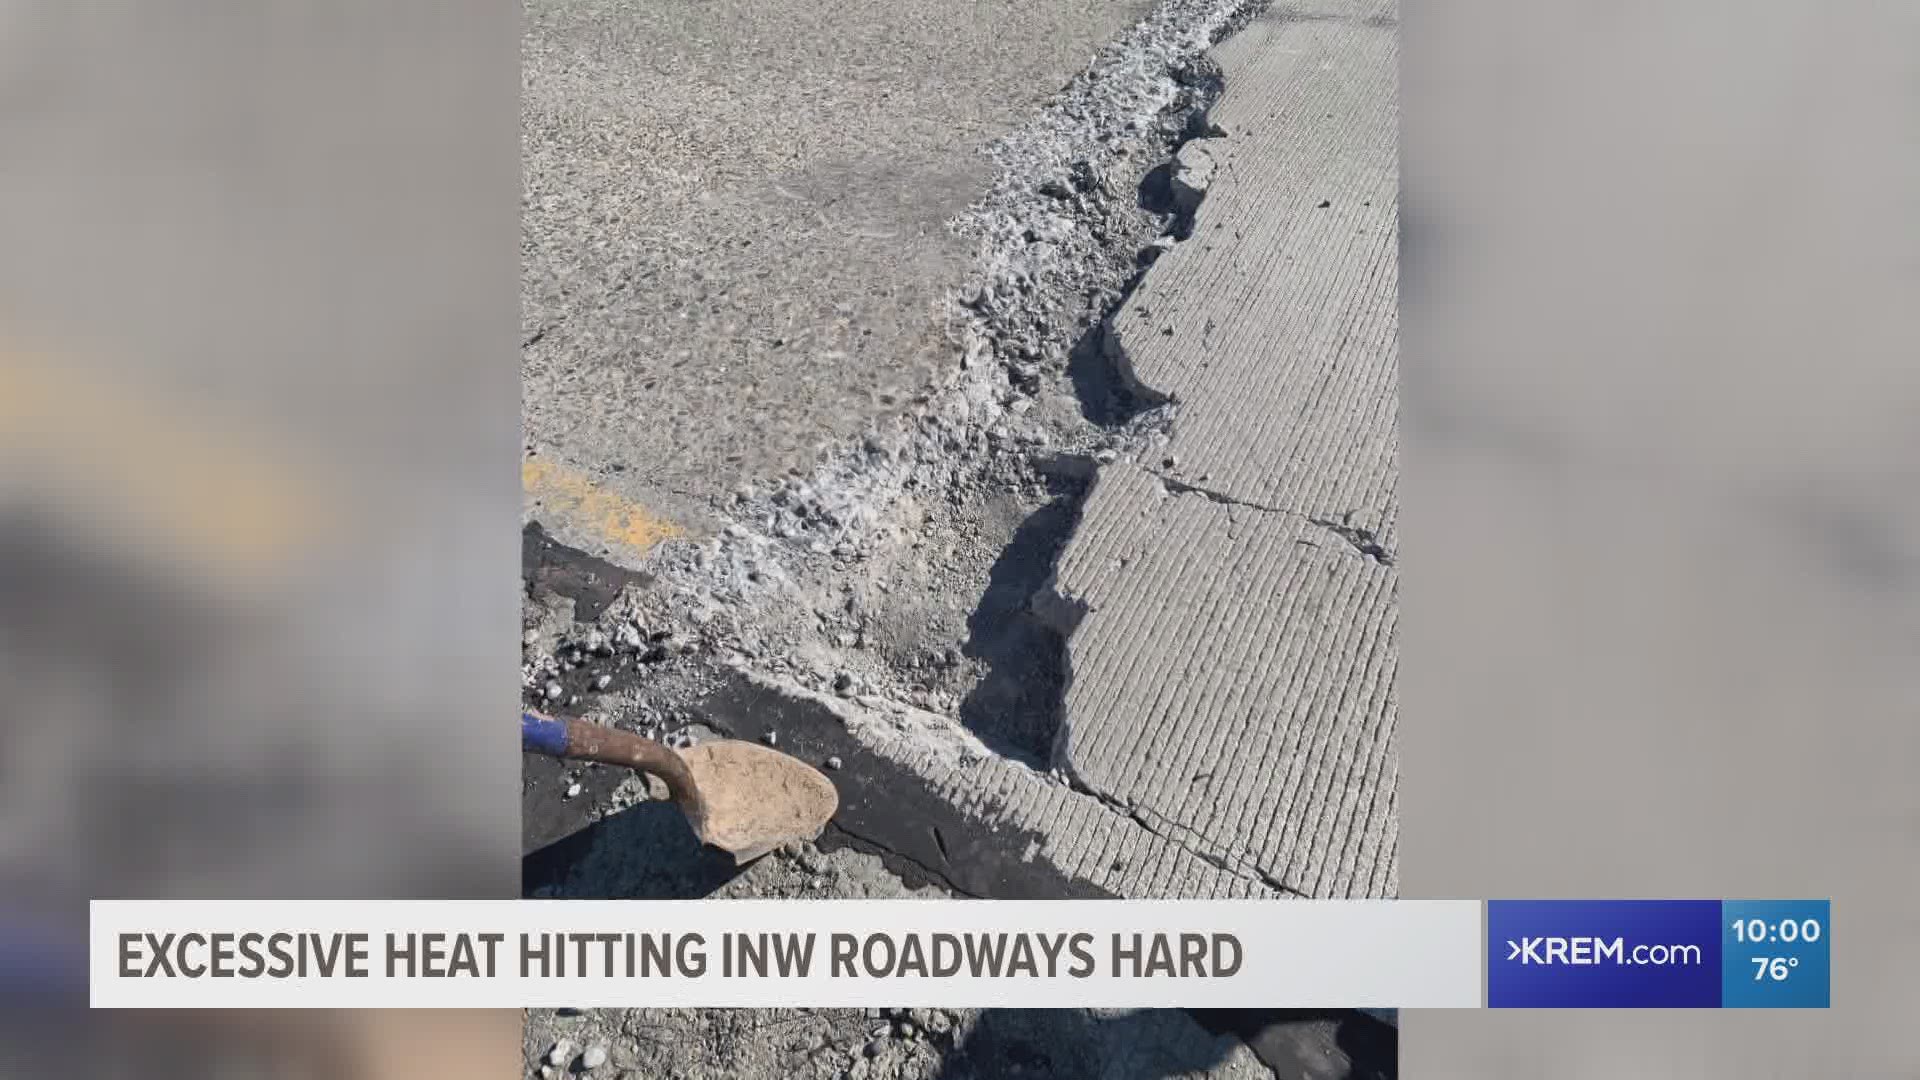 In winter, Spokane is plagued with potholes. Now in summer, the heat is causing pavement problems.